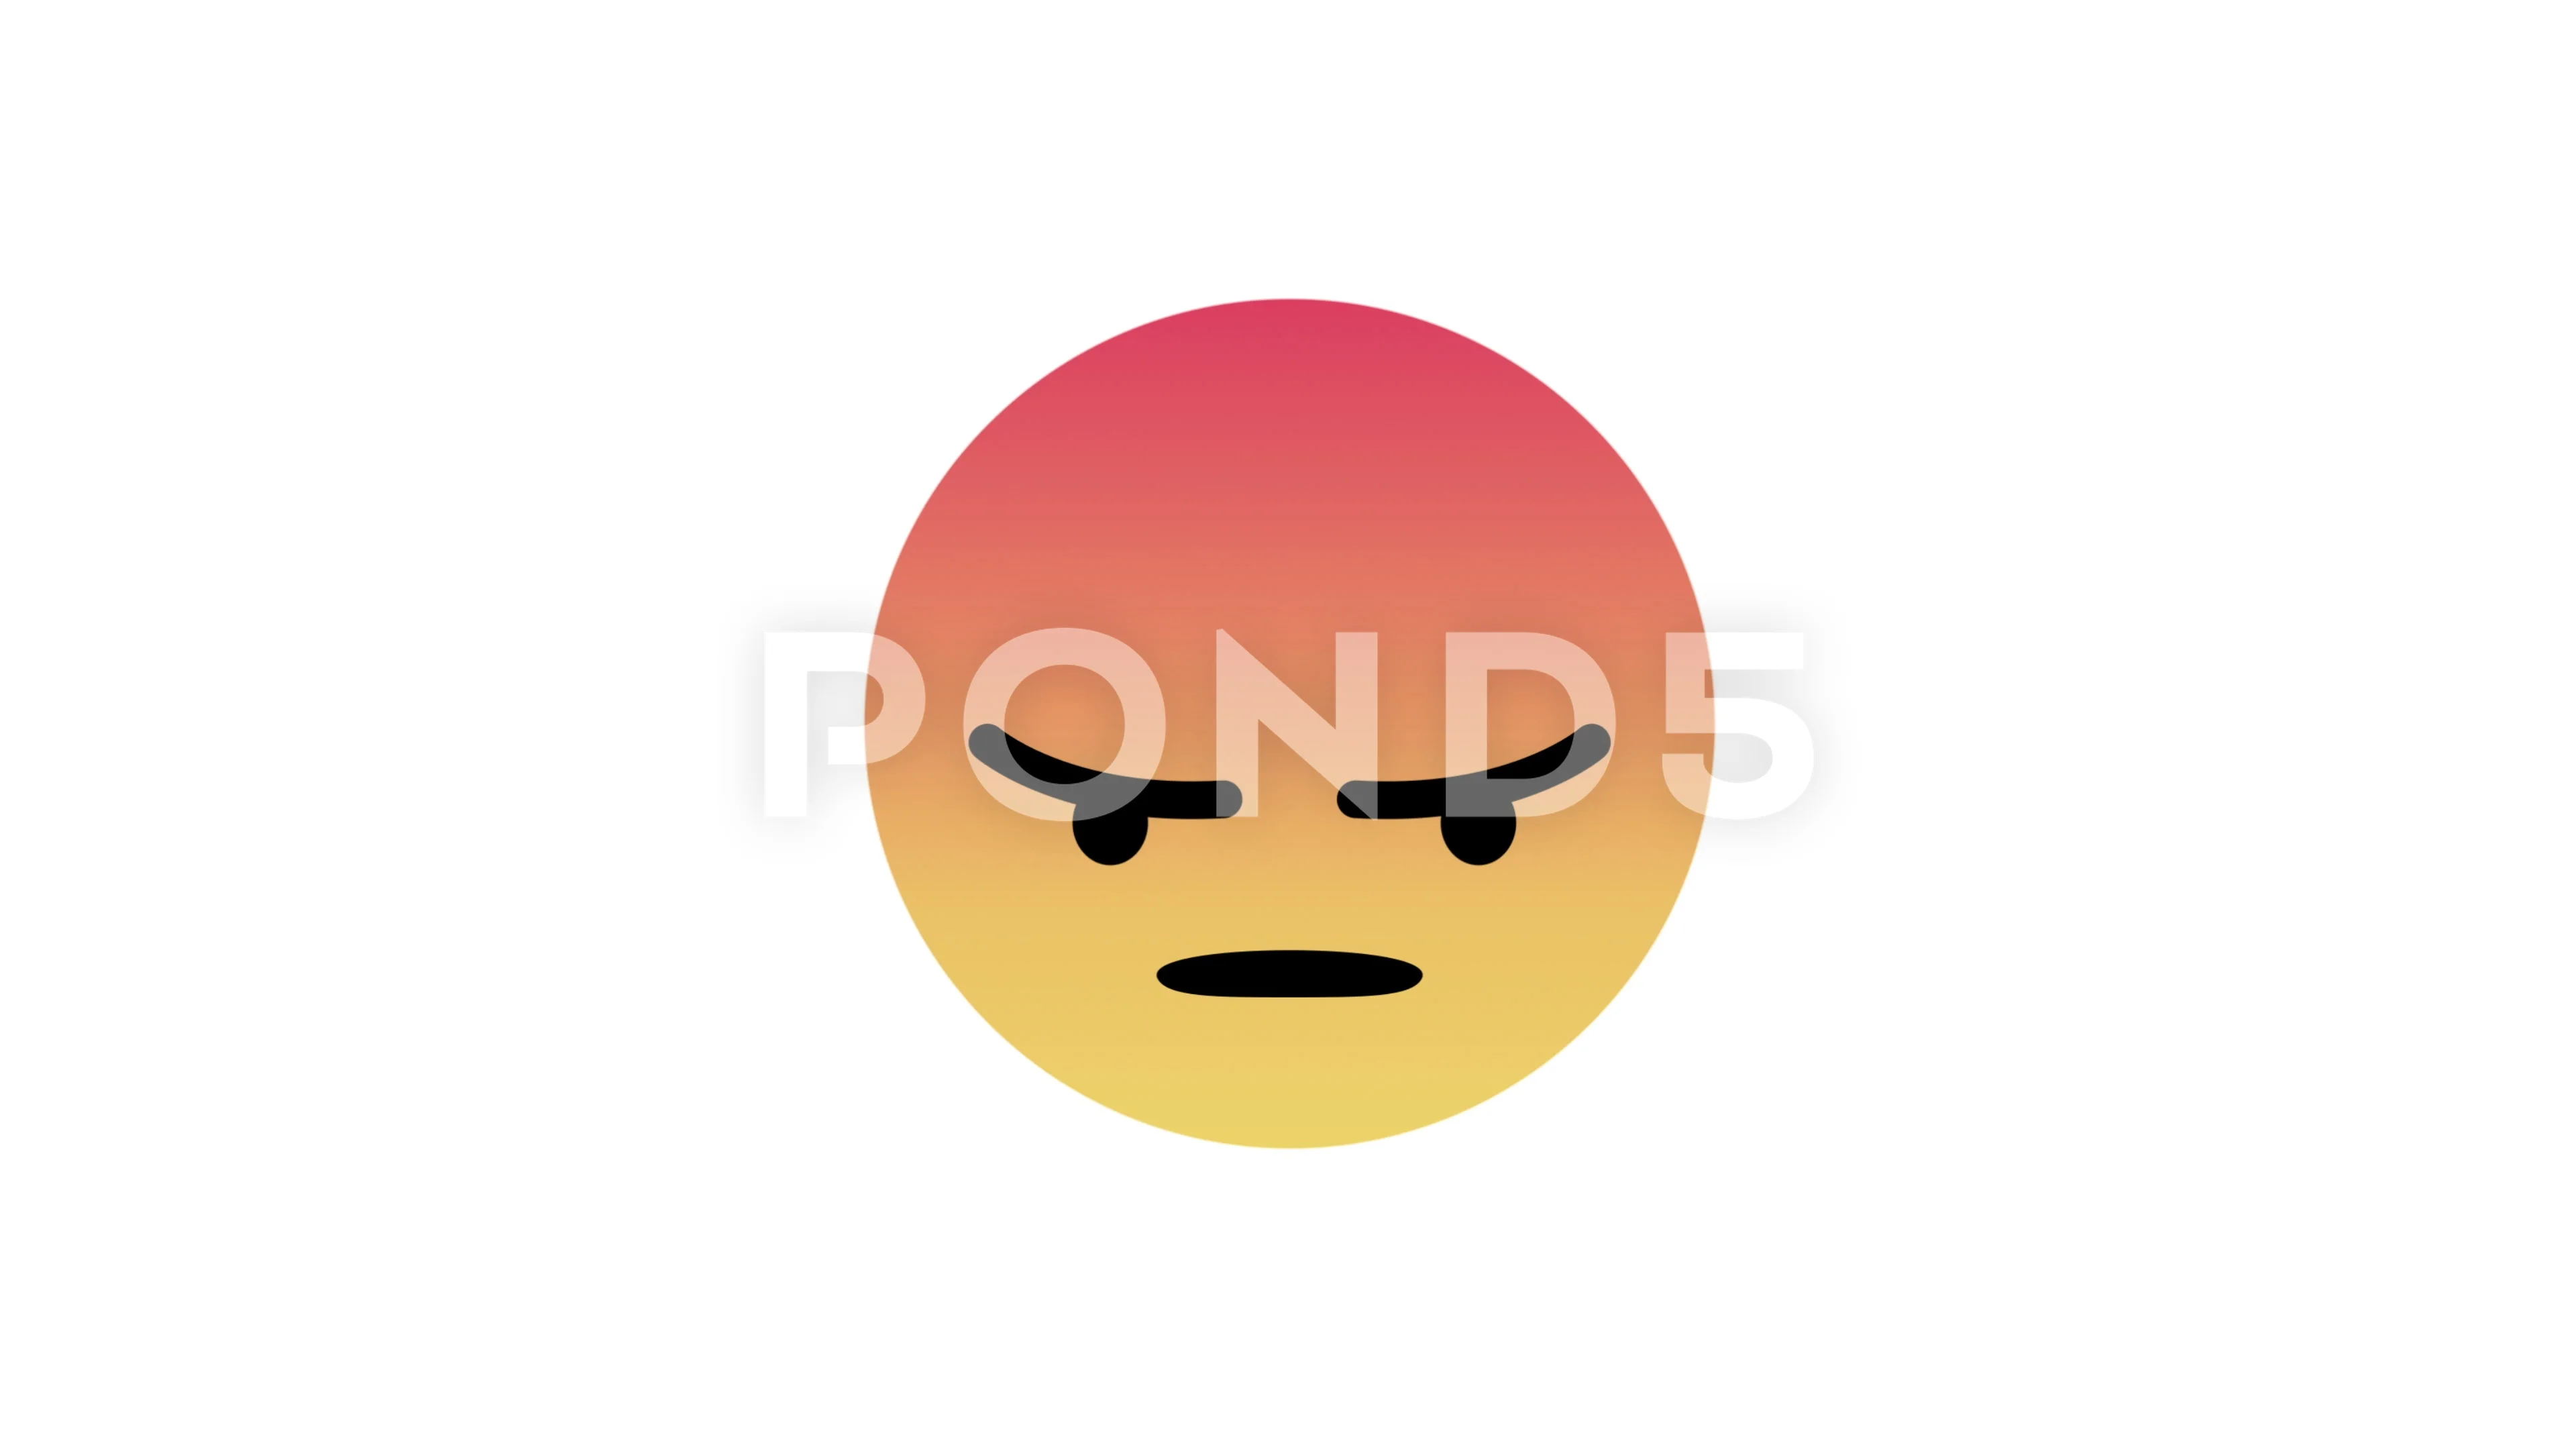 angry face emoticon facebook